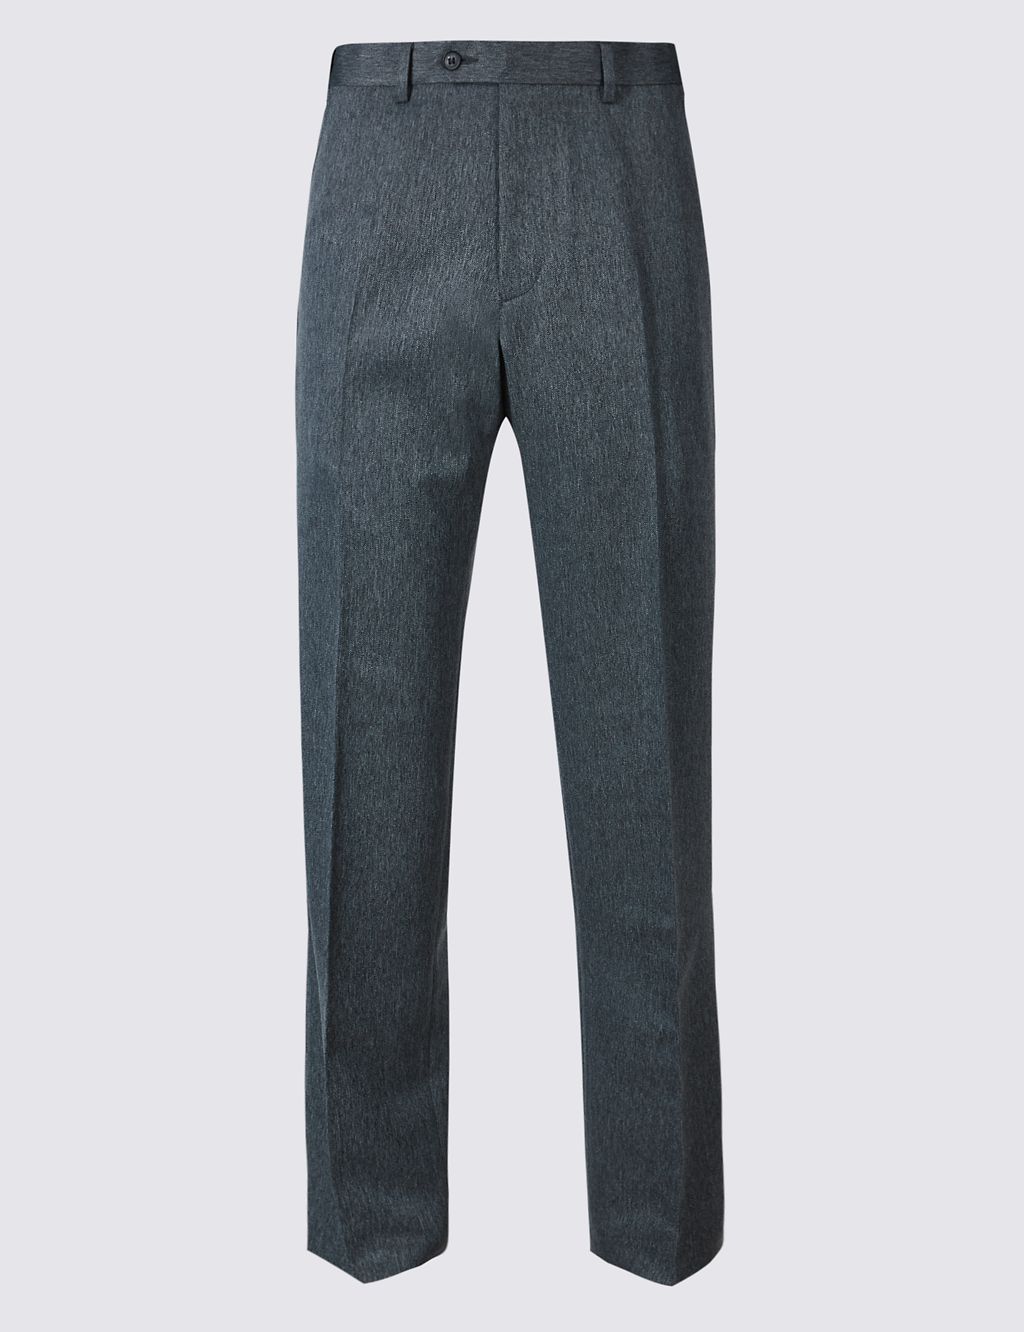 Regular Fit Flat Front Trousers 1 of 5